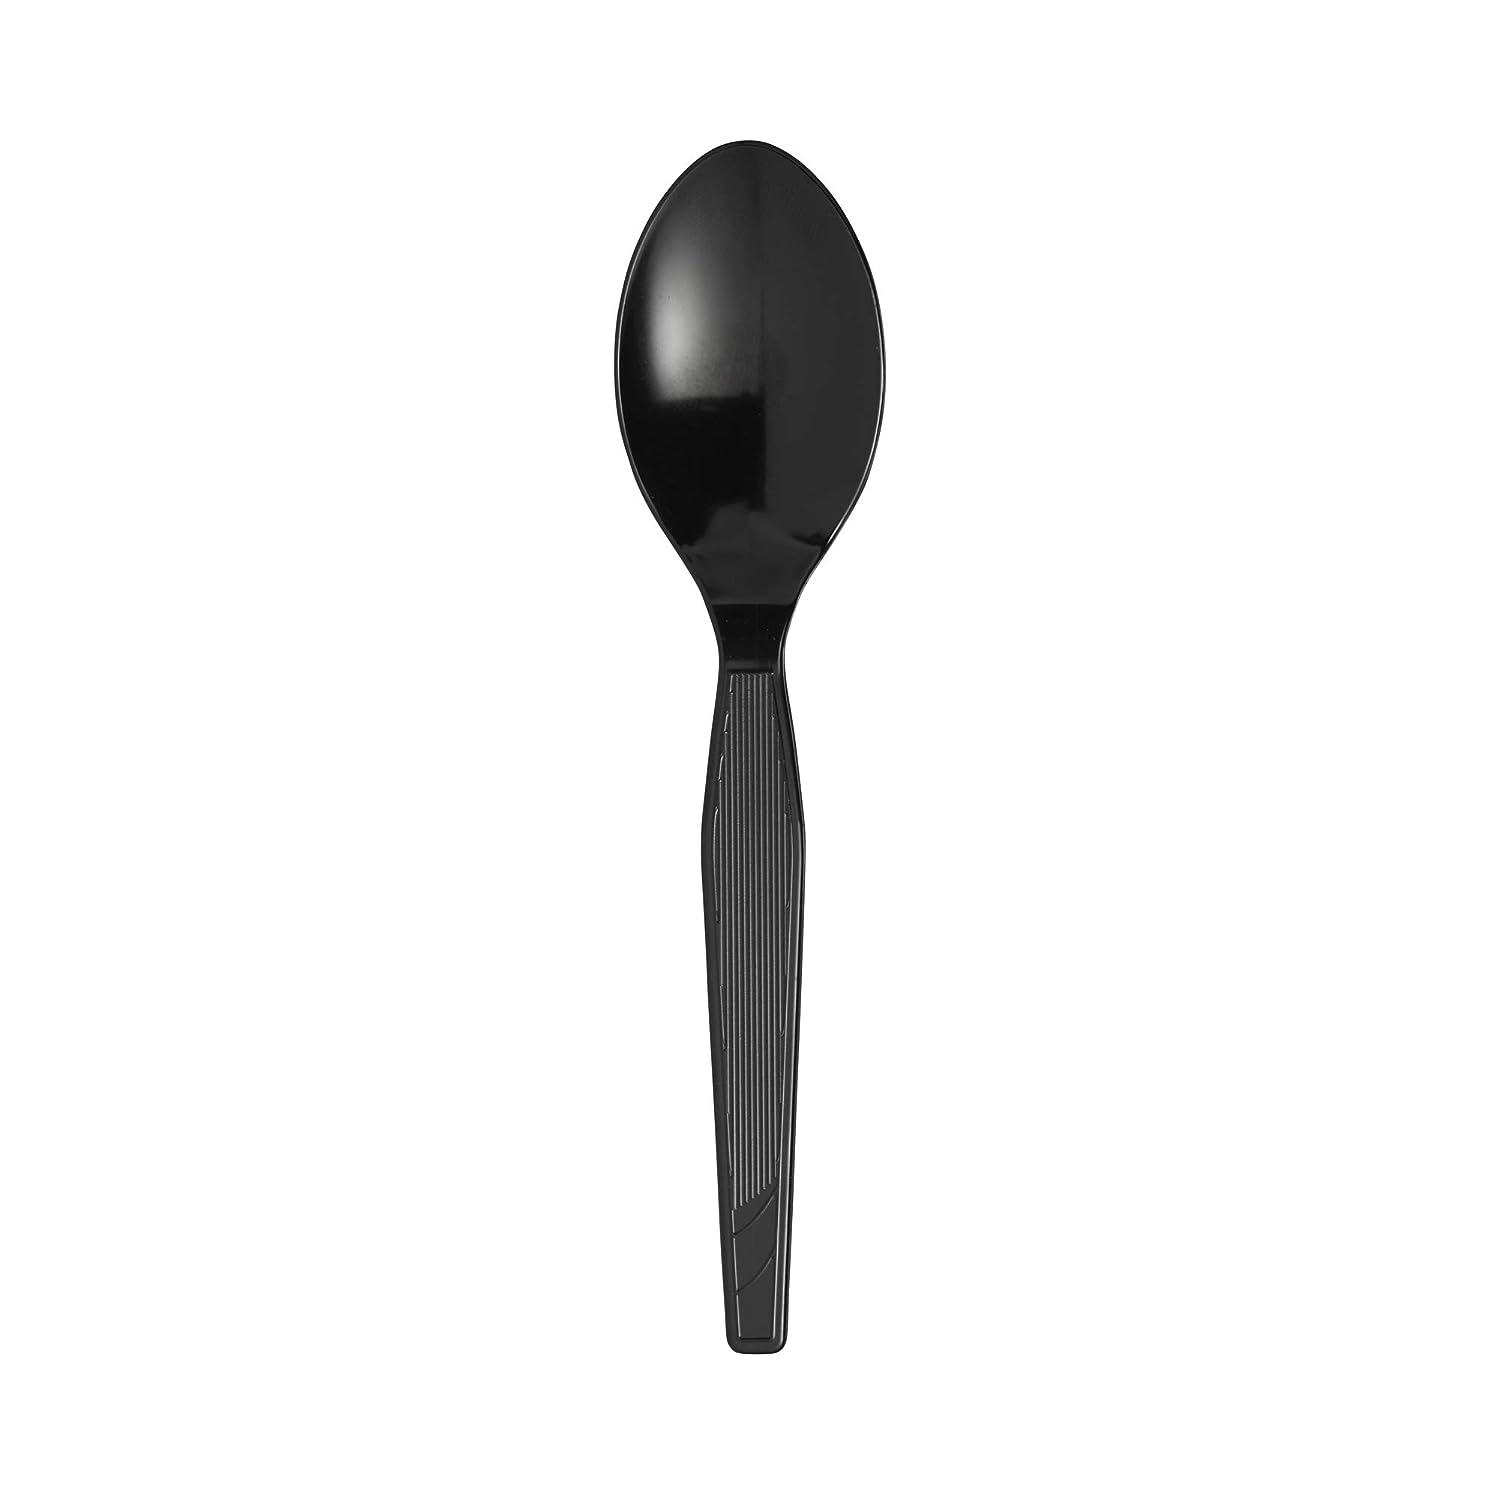 Dixie 100% Recycled Polystyrene Medium-Weight Spoon by GP PRO (Georgia-Pacific); Black; TMR517; 1000 Forks Per Case